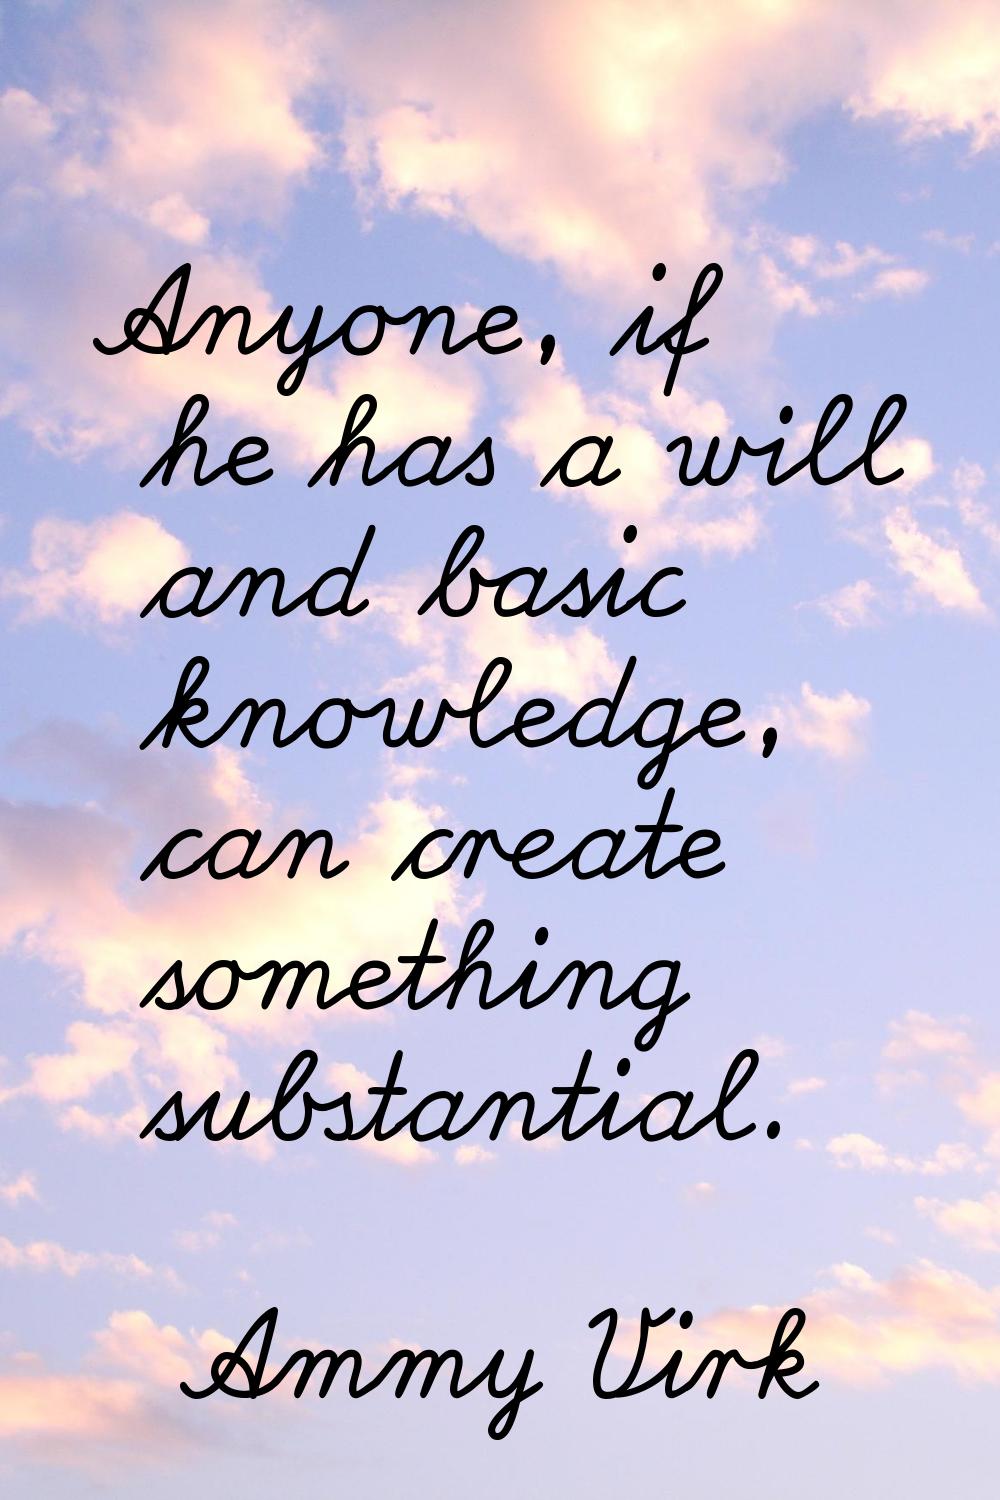 Anyone, if he has a will and basic knowledge, can create something substantial.